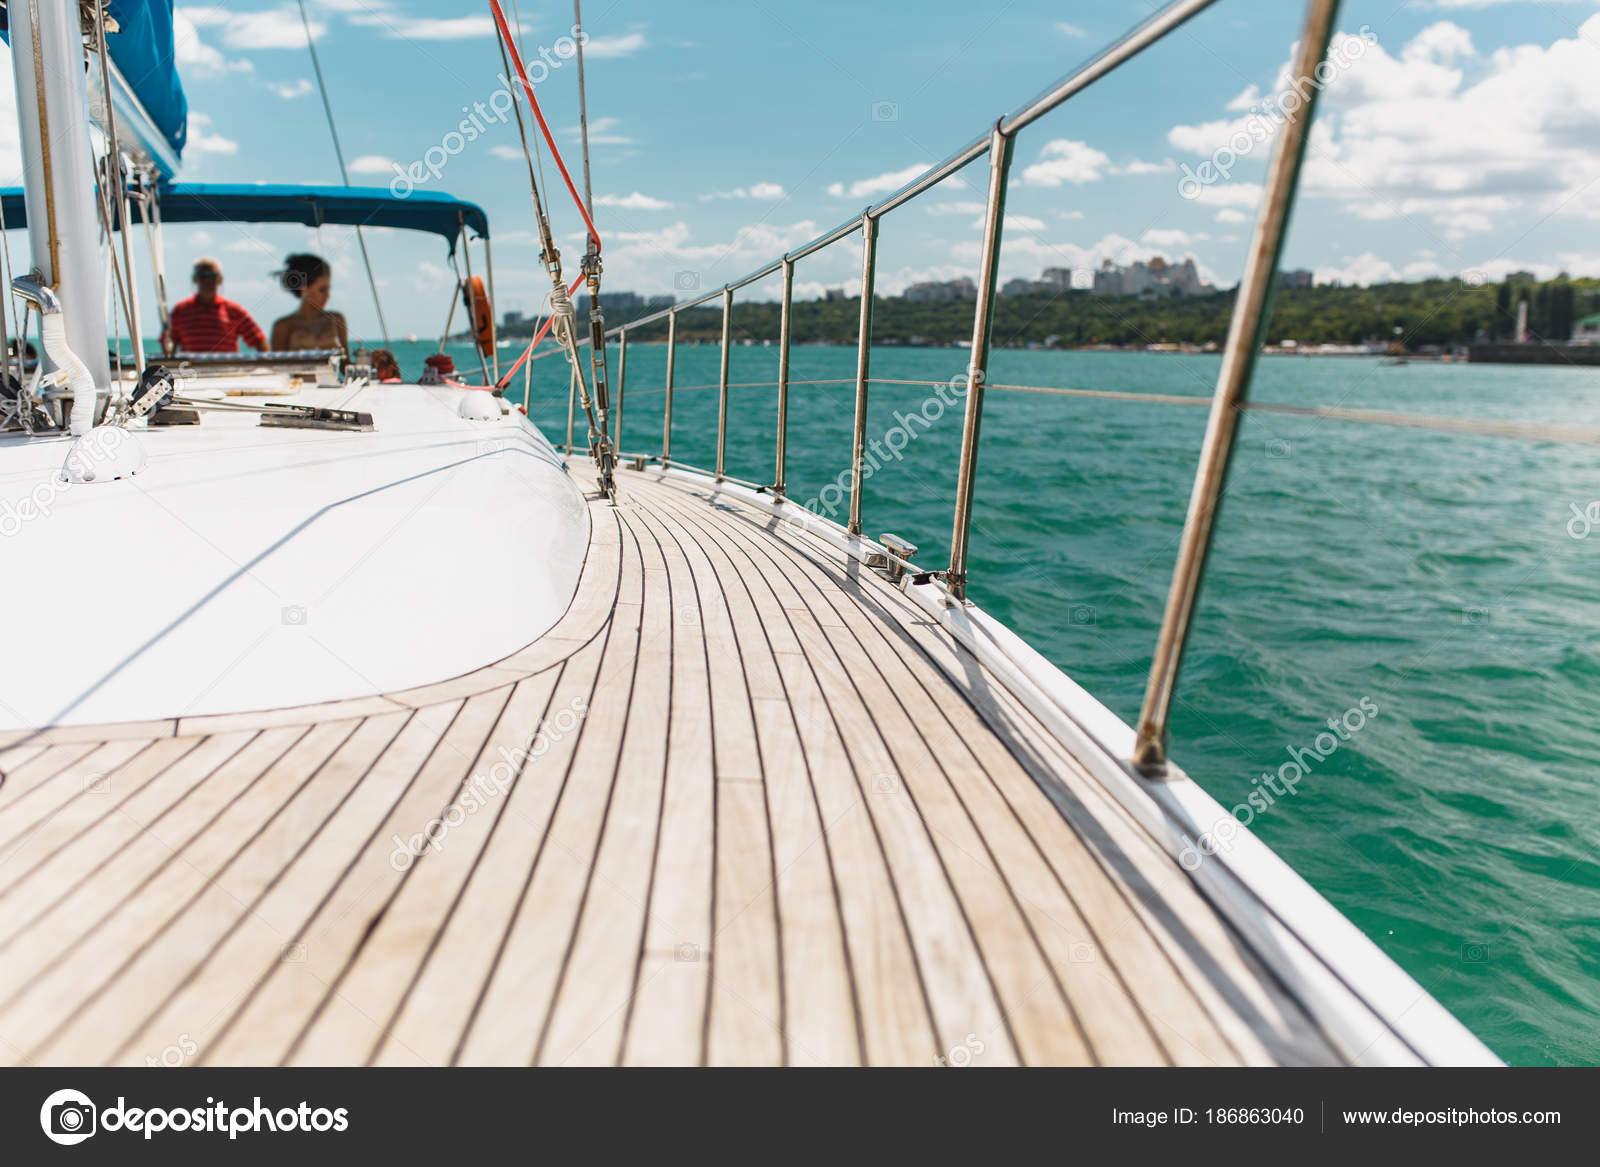 Man Sitting On Deck Of Sailboat, Casco Photograph By Peter, 49% OFF